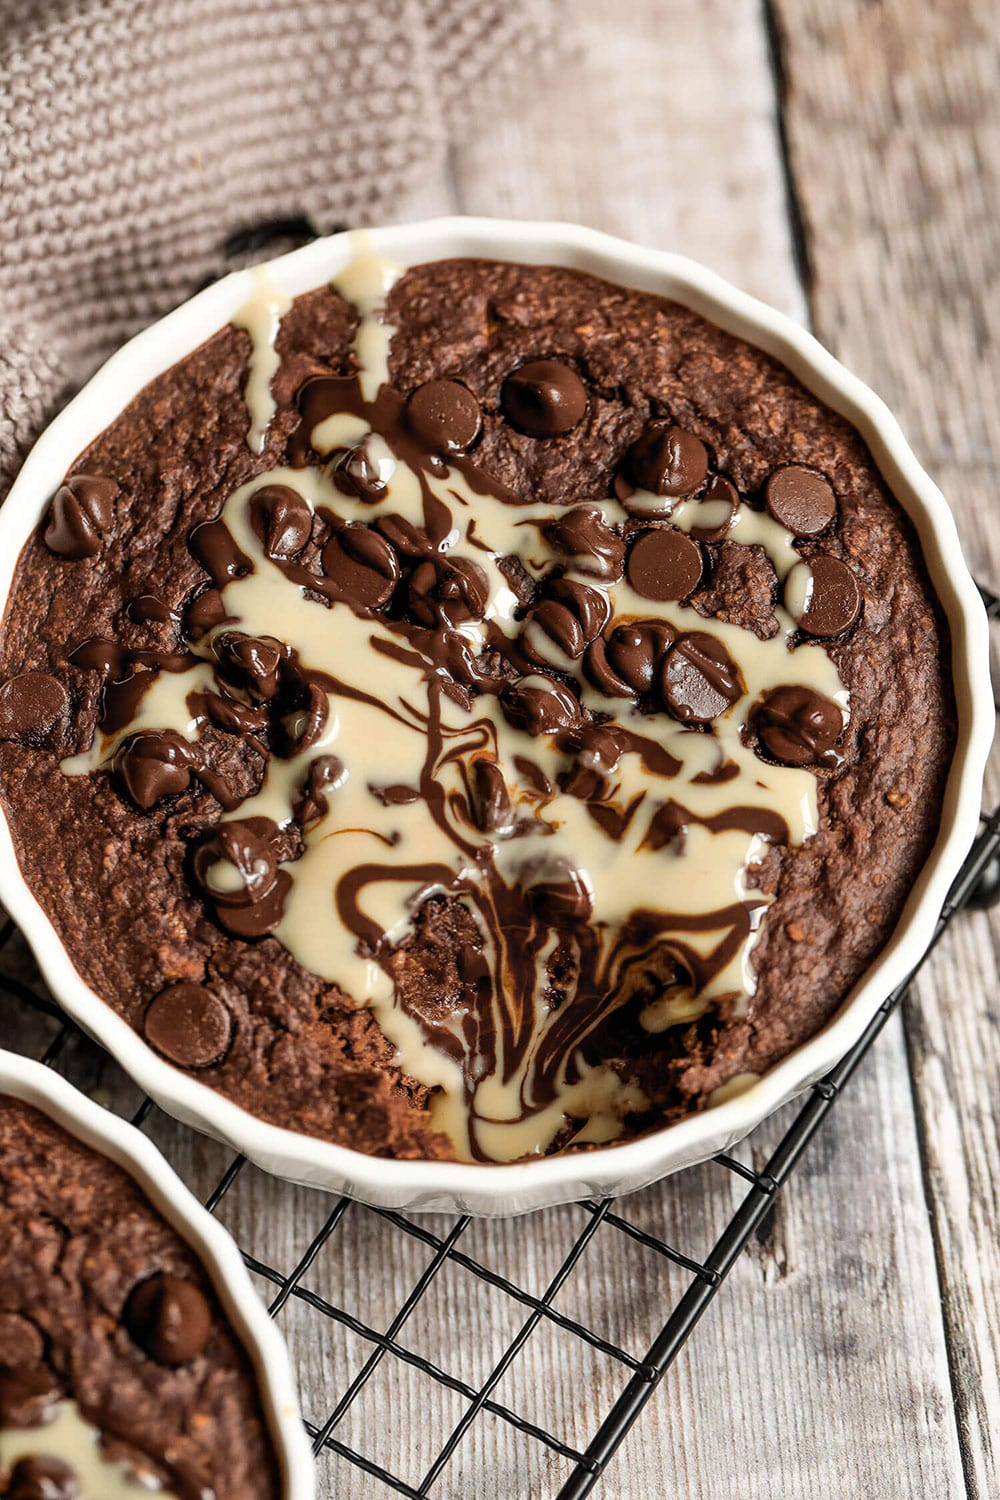 22 Chocolate Breakfast Recipes (Plant-Based & Dairy-Free!)